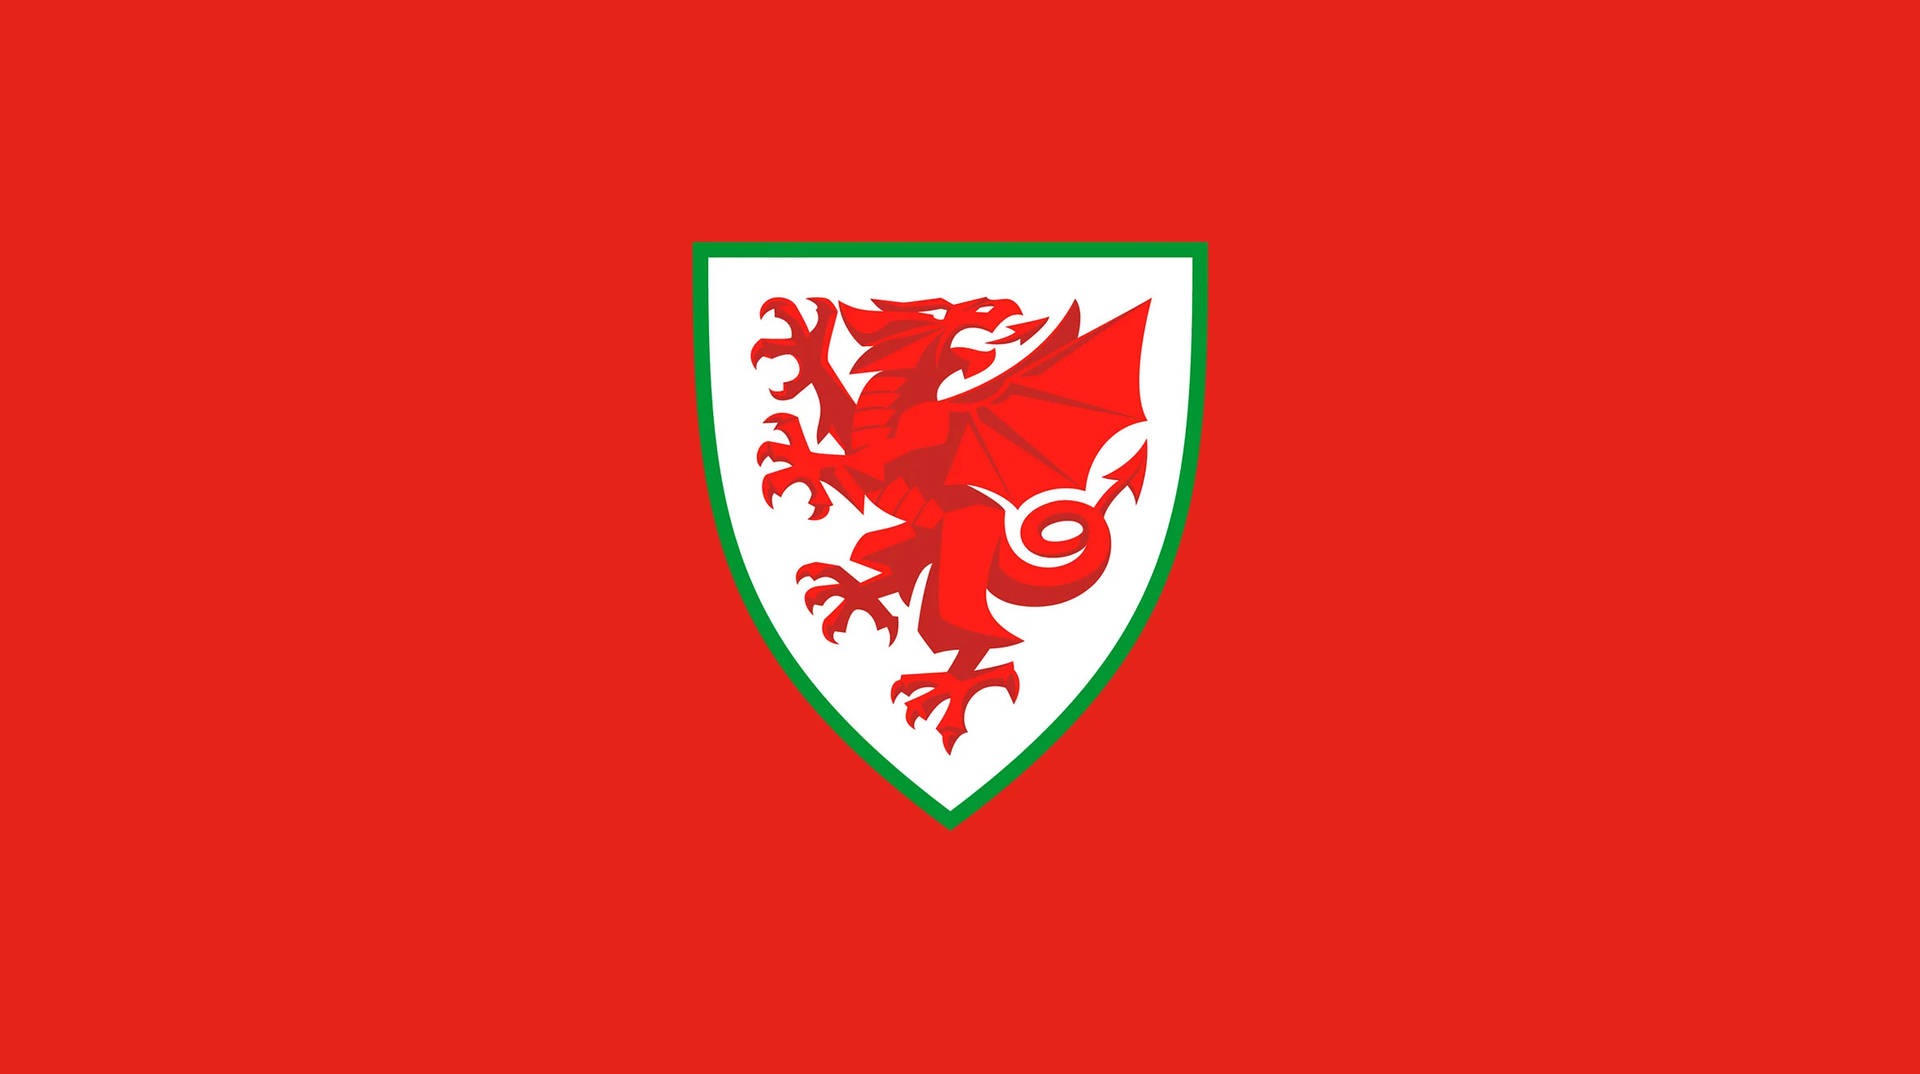 Wales National Football Team Shield Emblem Picture